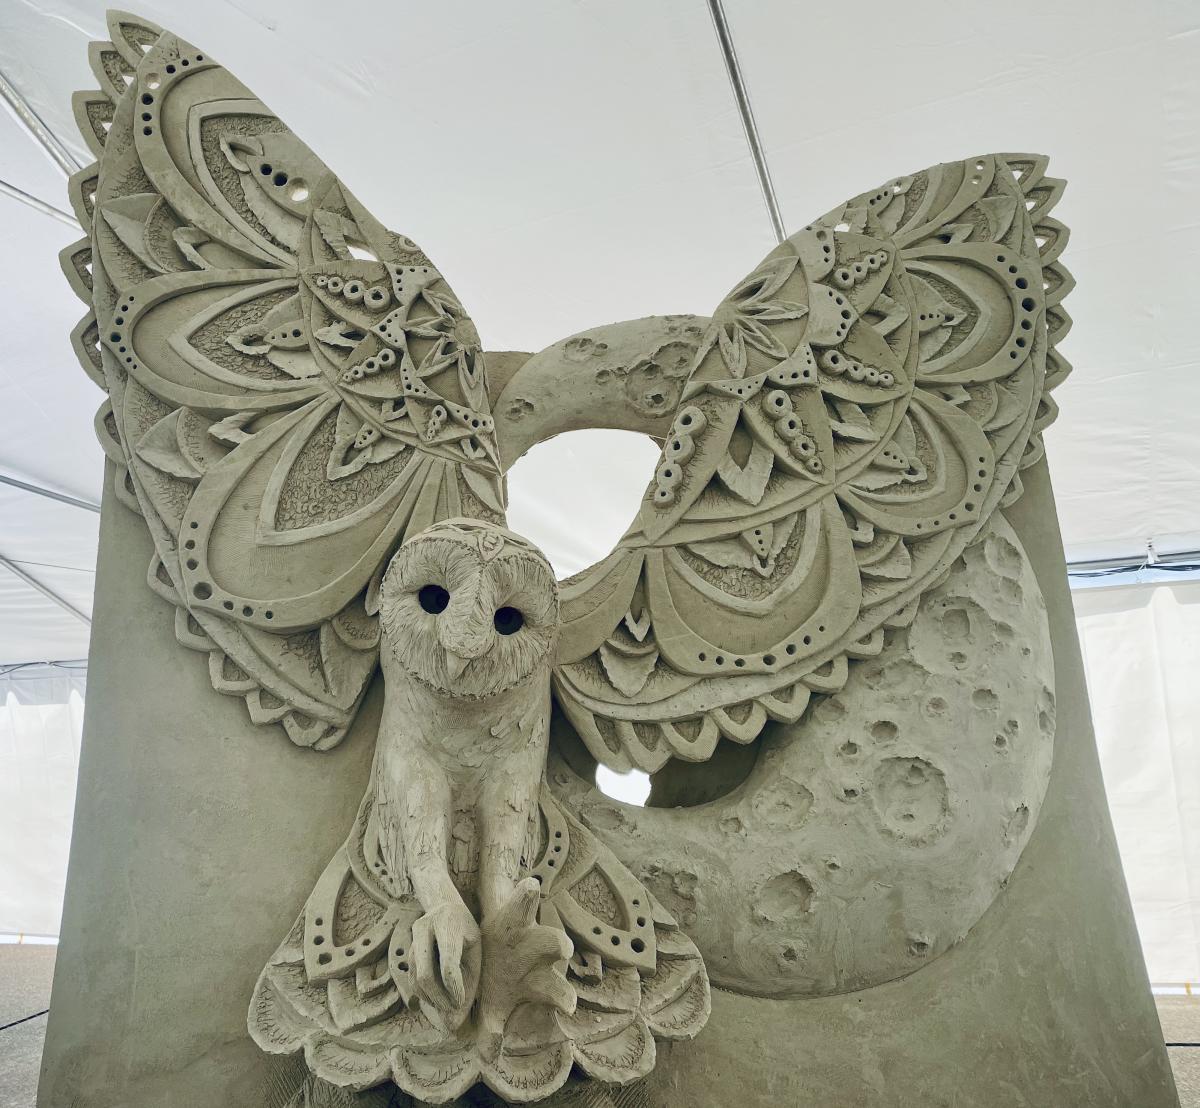 Sand sculpture under a tent depicting a flying owl with intricate wings